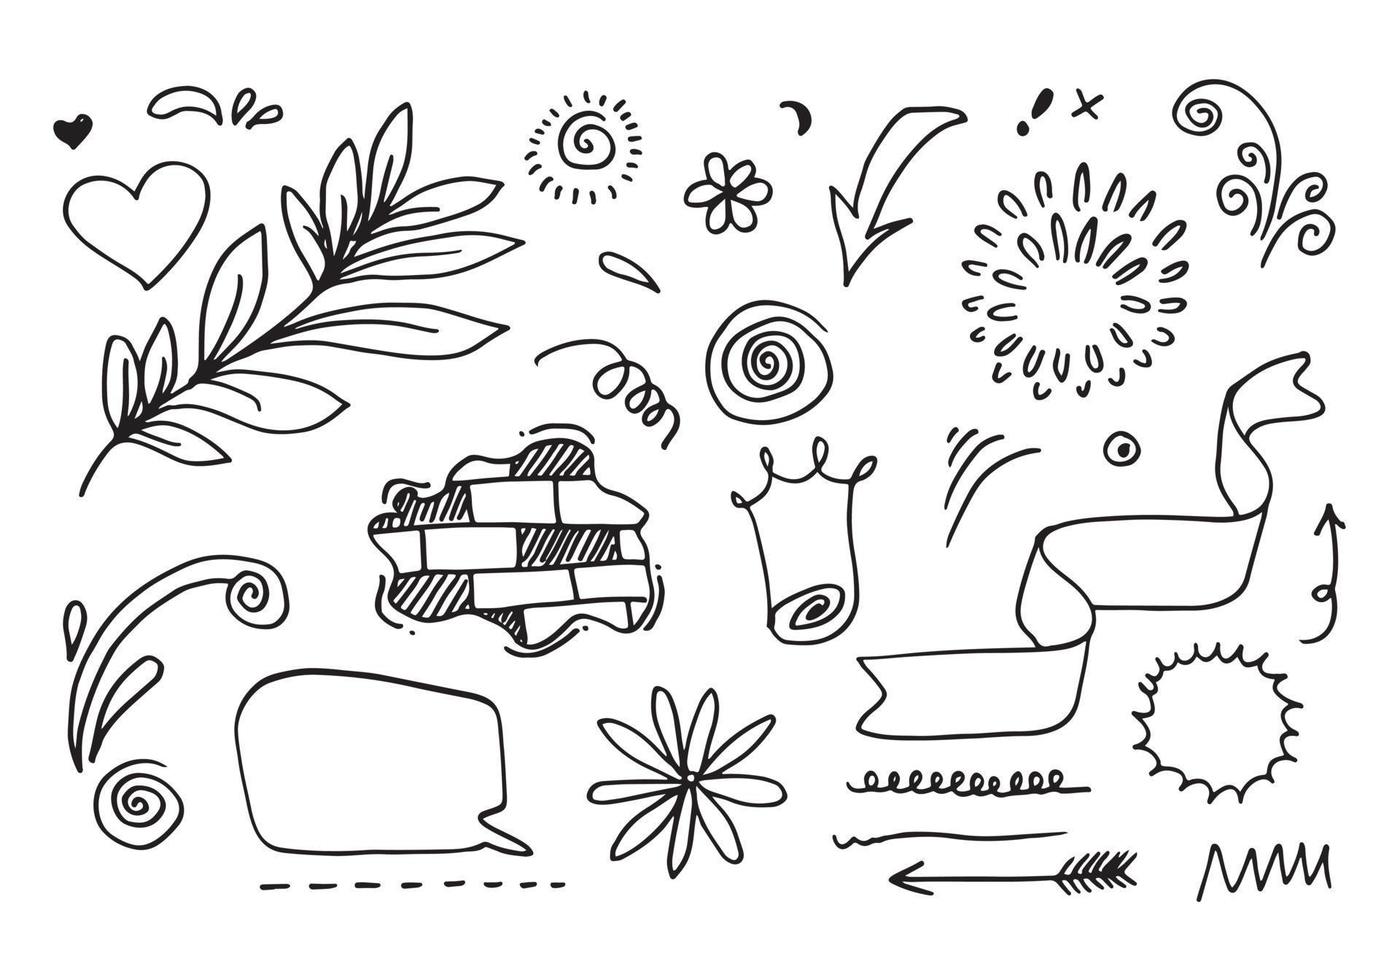 Hand drawn set elements, black on white background. Wall,Arrow, heart, love, star, leaf, circle, light, flower, crown,Swishes, swoops, emphasis ,swirl ,speech bubble for concept design. vector